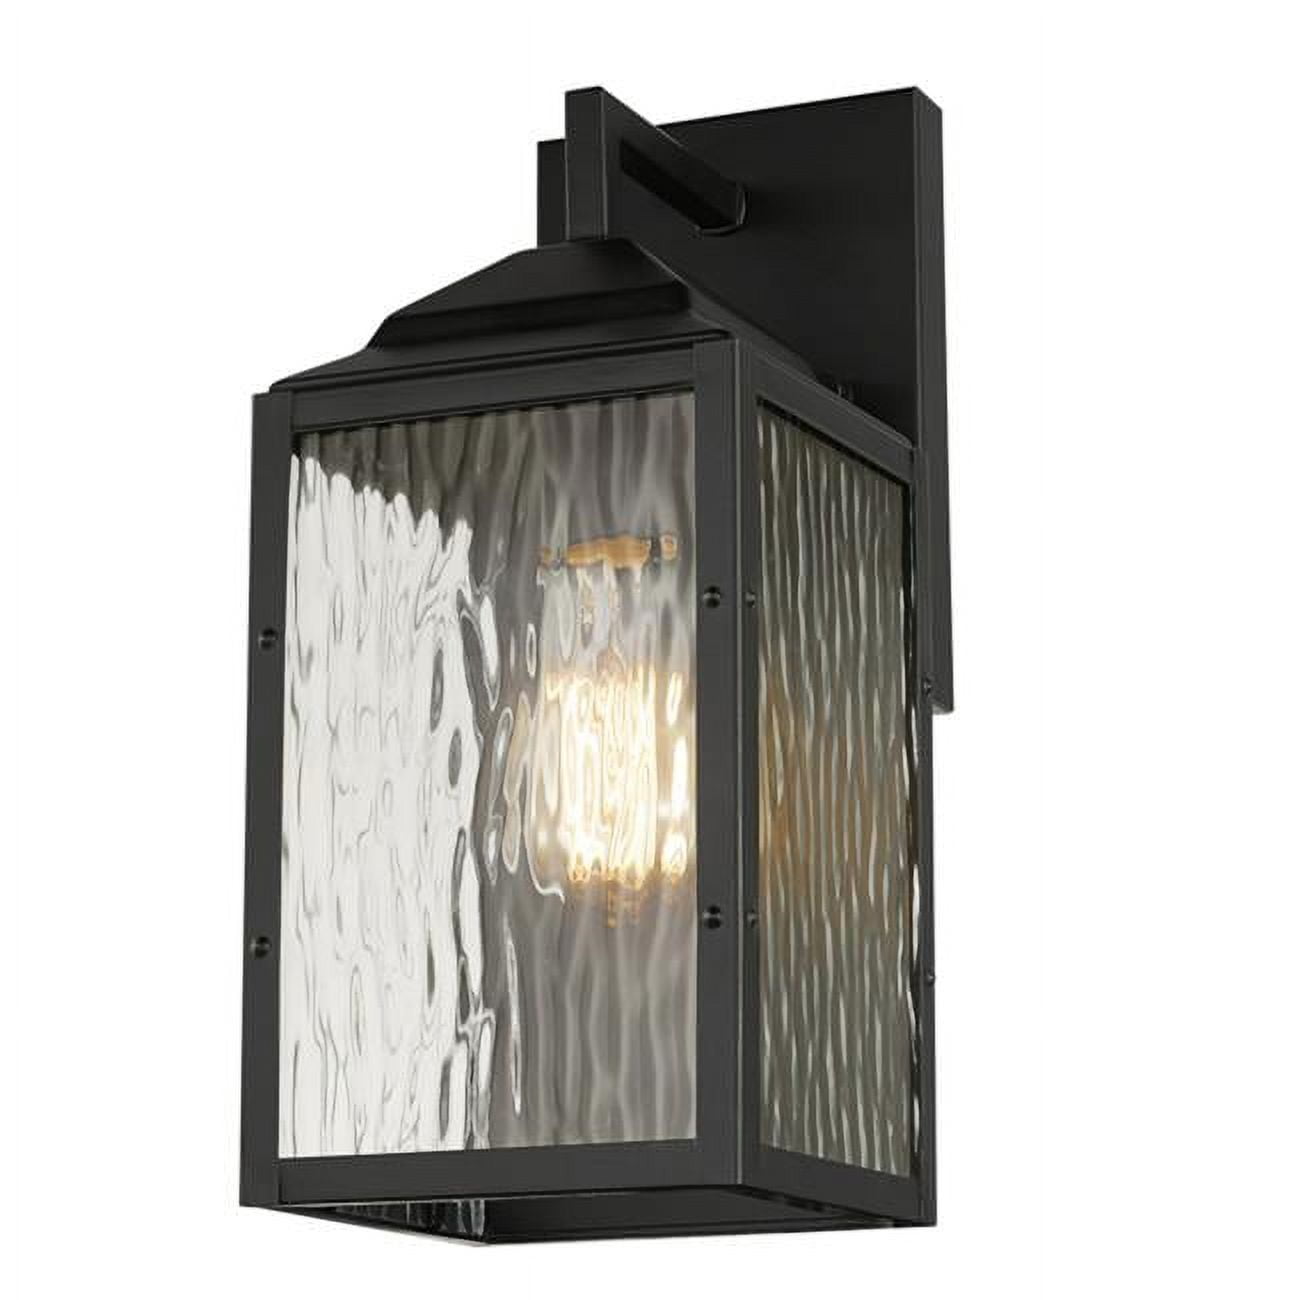 Picture of Globe Electric 3008668 Miller 1-Light Downlight Wall Sconce, Black